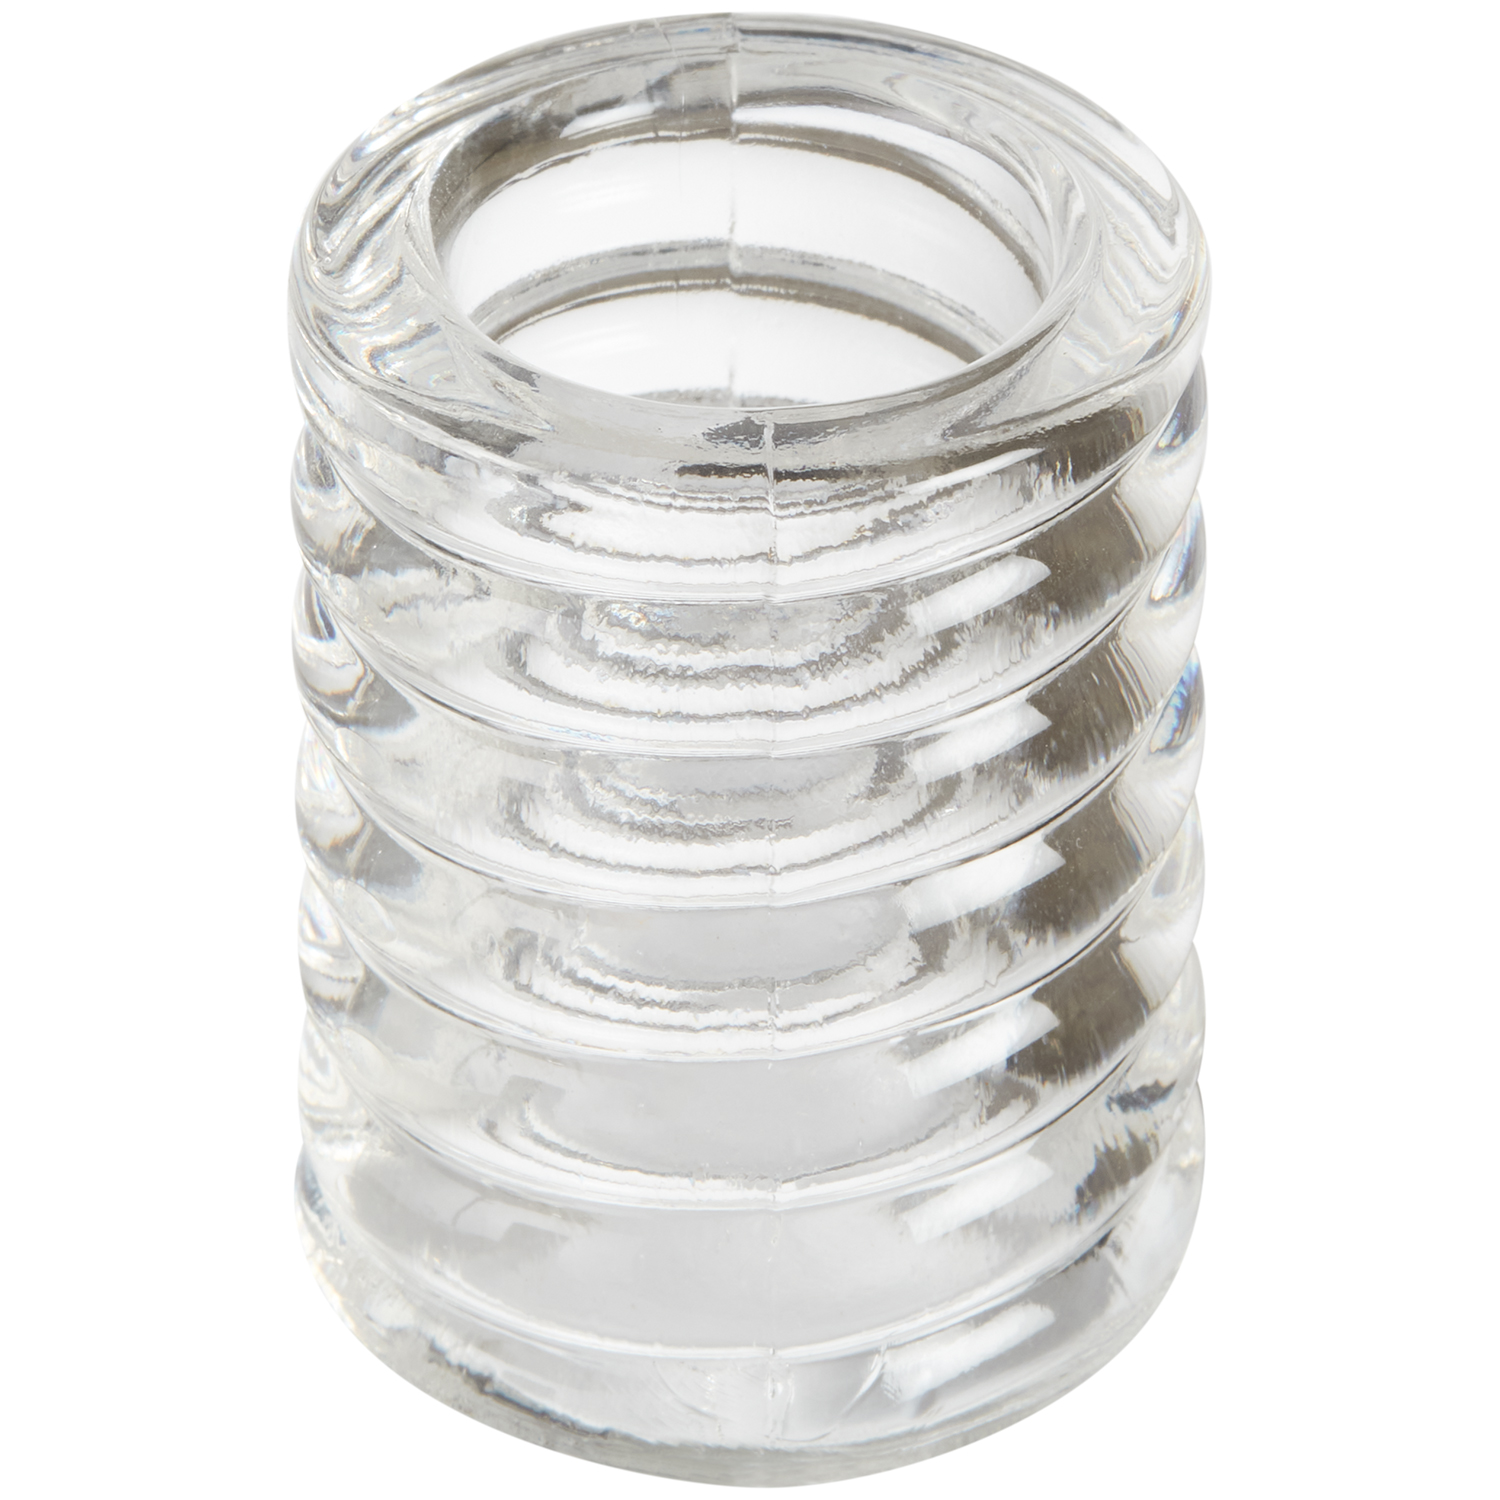 TitanMen Stretch Cock Cage Penis Ring - Clear